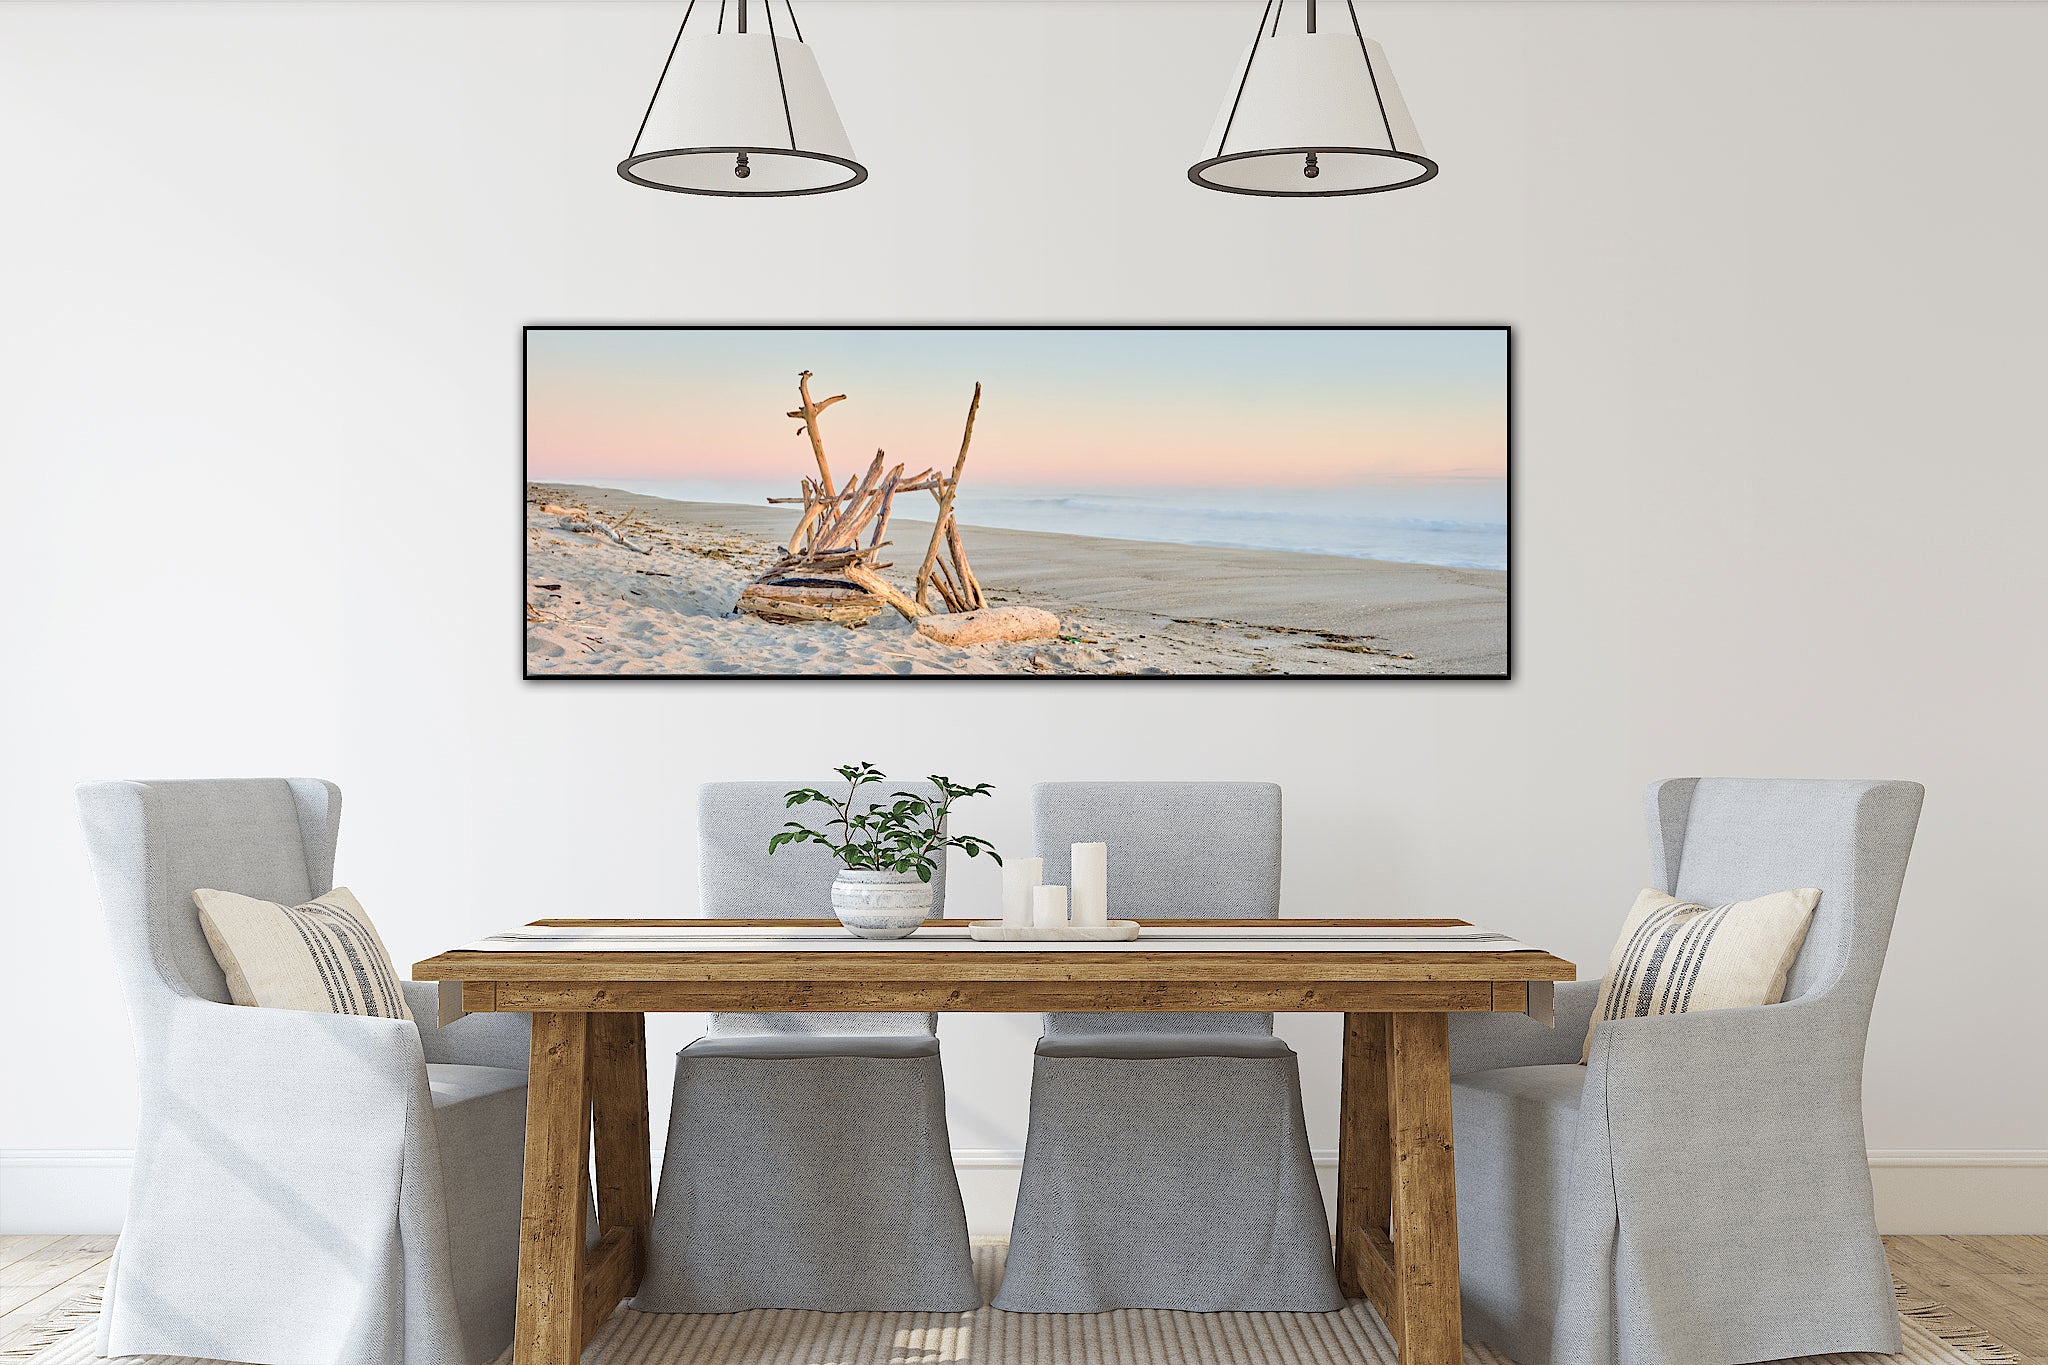 Connecting with Nature- The Power of Landscape Photography in Interior Decor by New Zealand Award Winning Landscape Photographer Stephen Milner